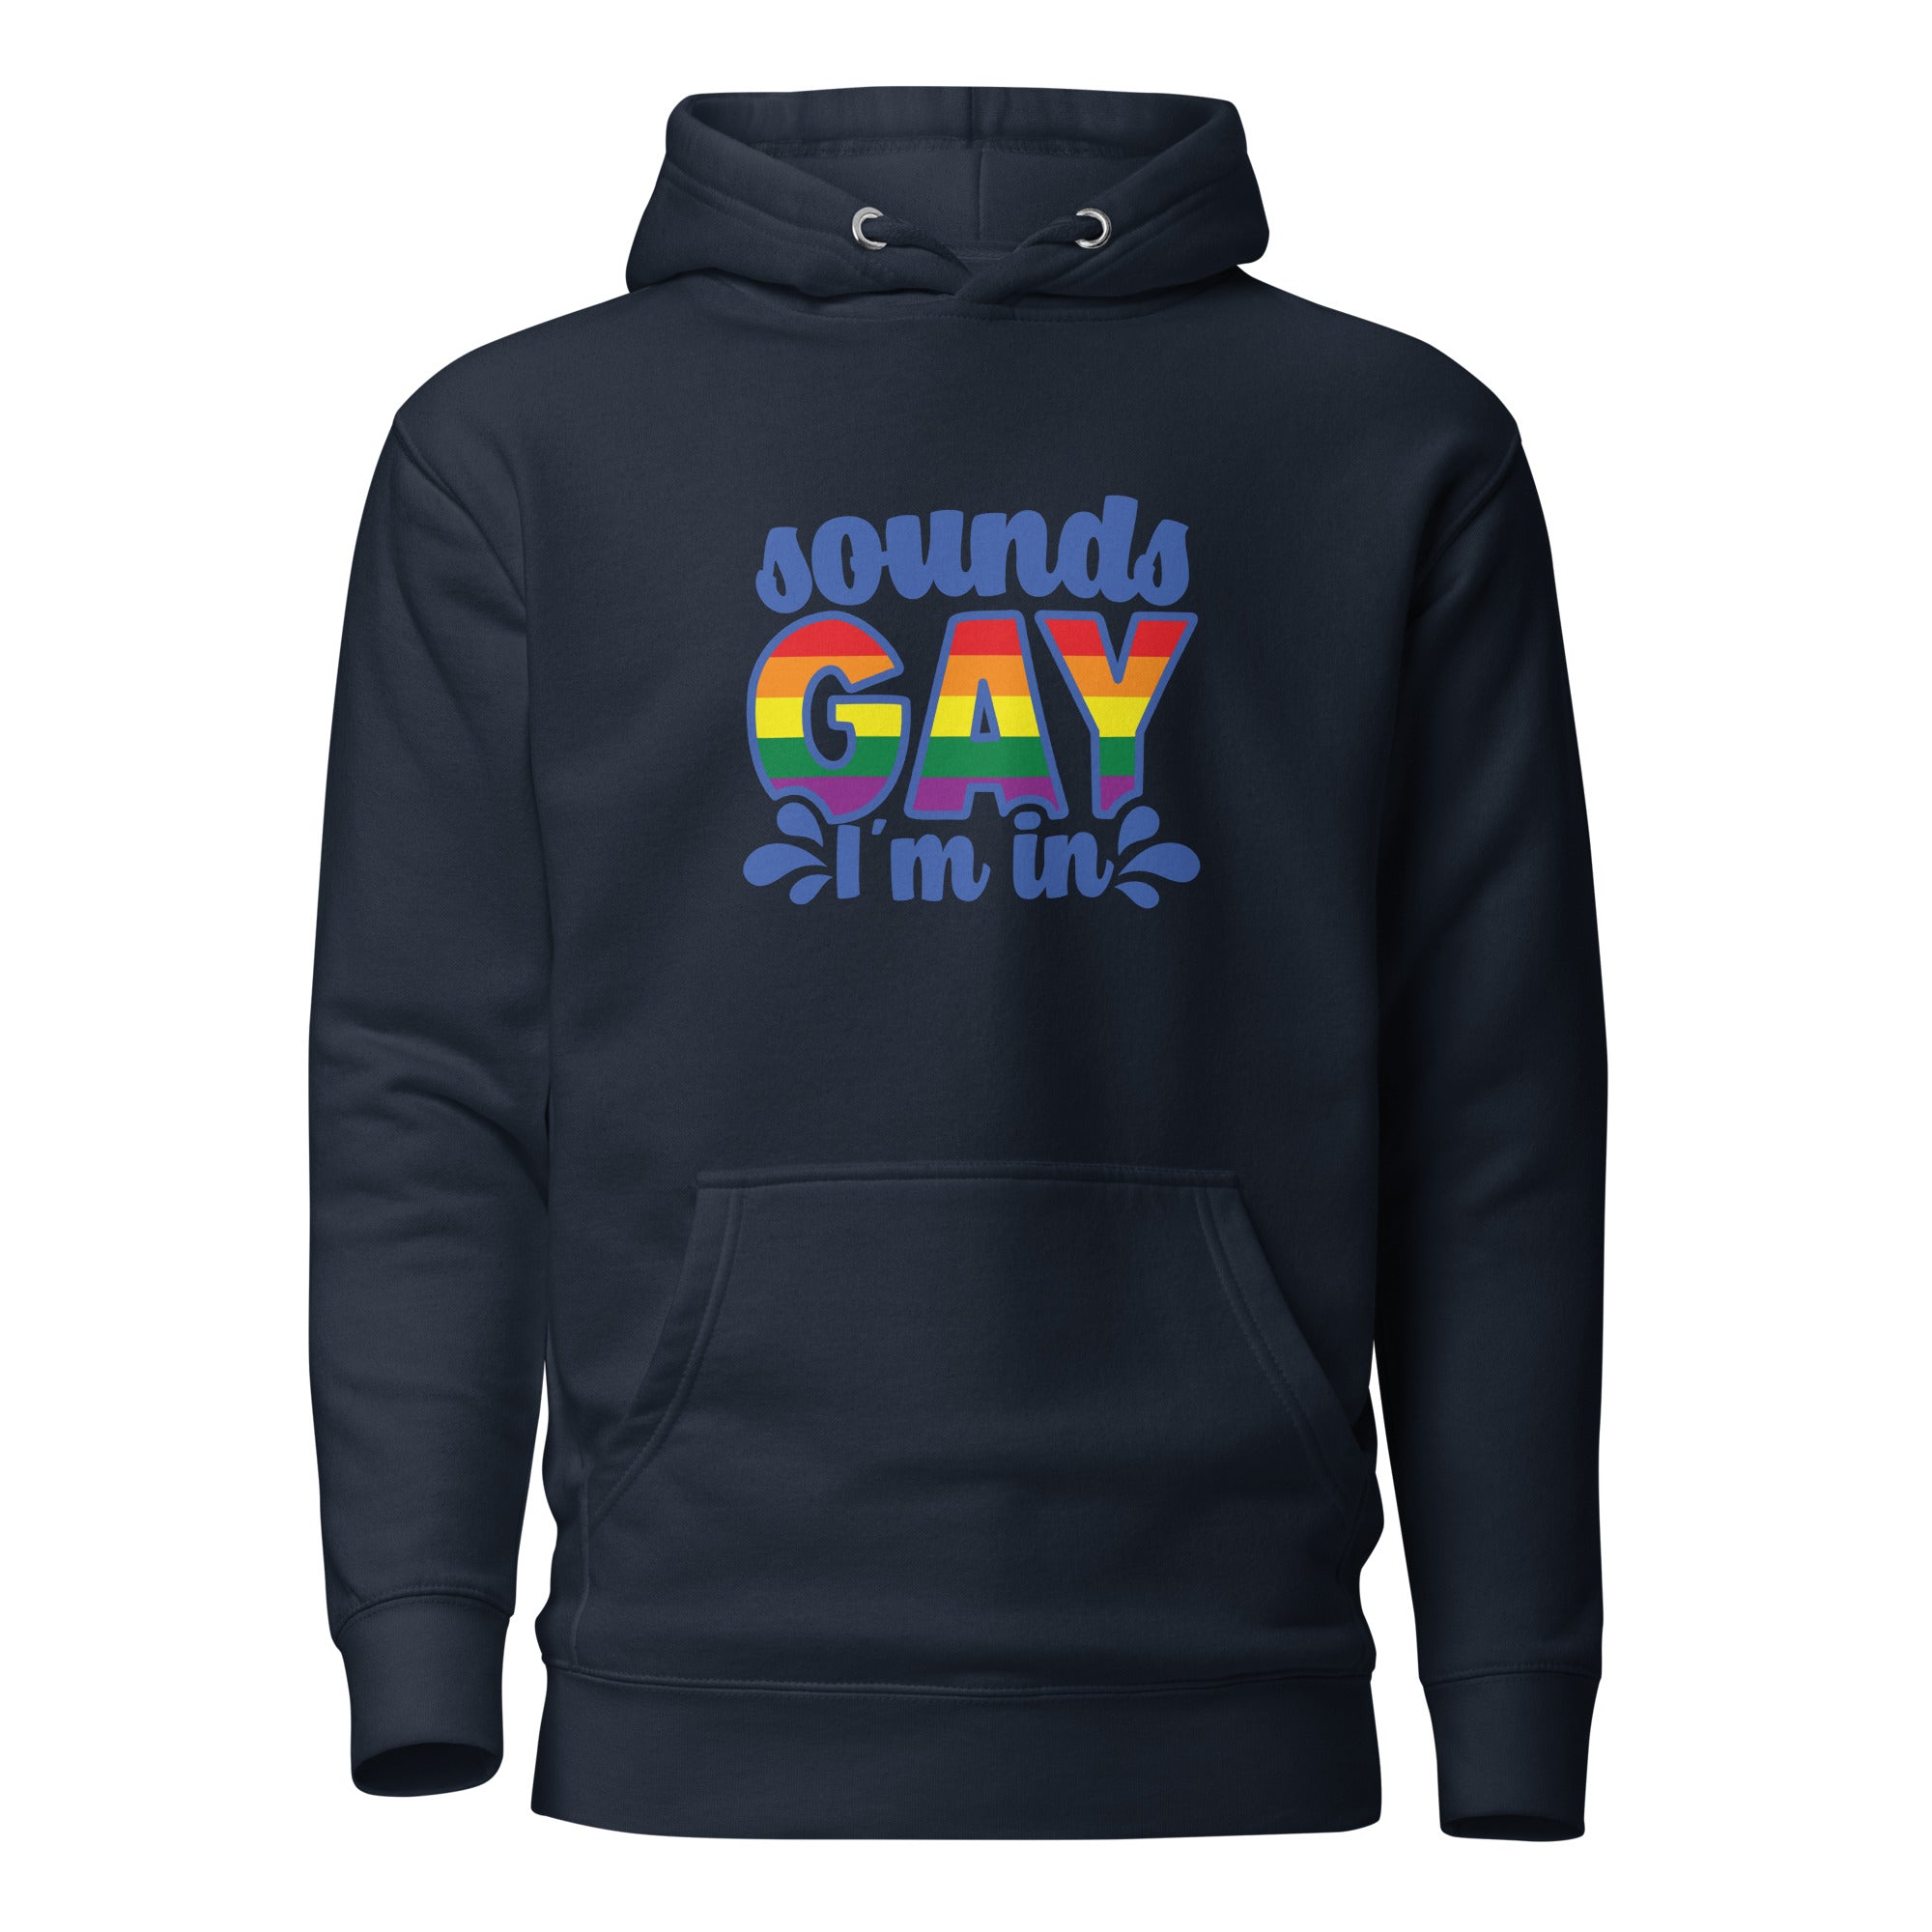 Unisex Hoodie- Sounds gay I'm in